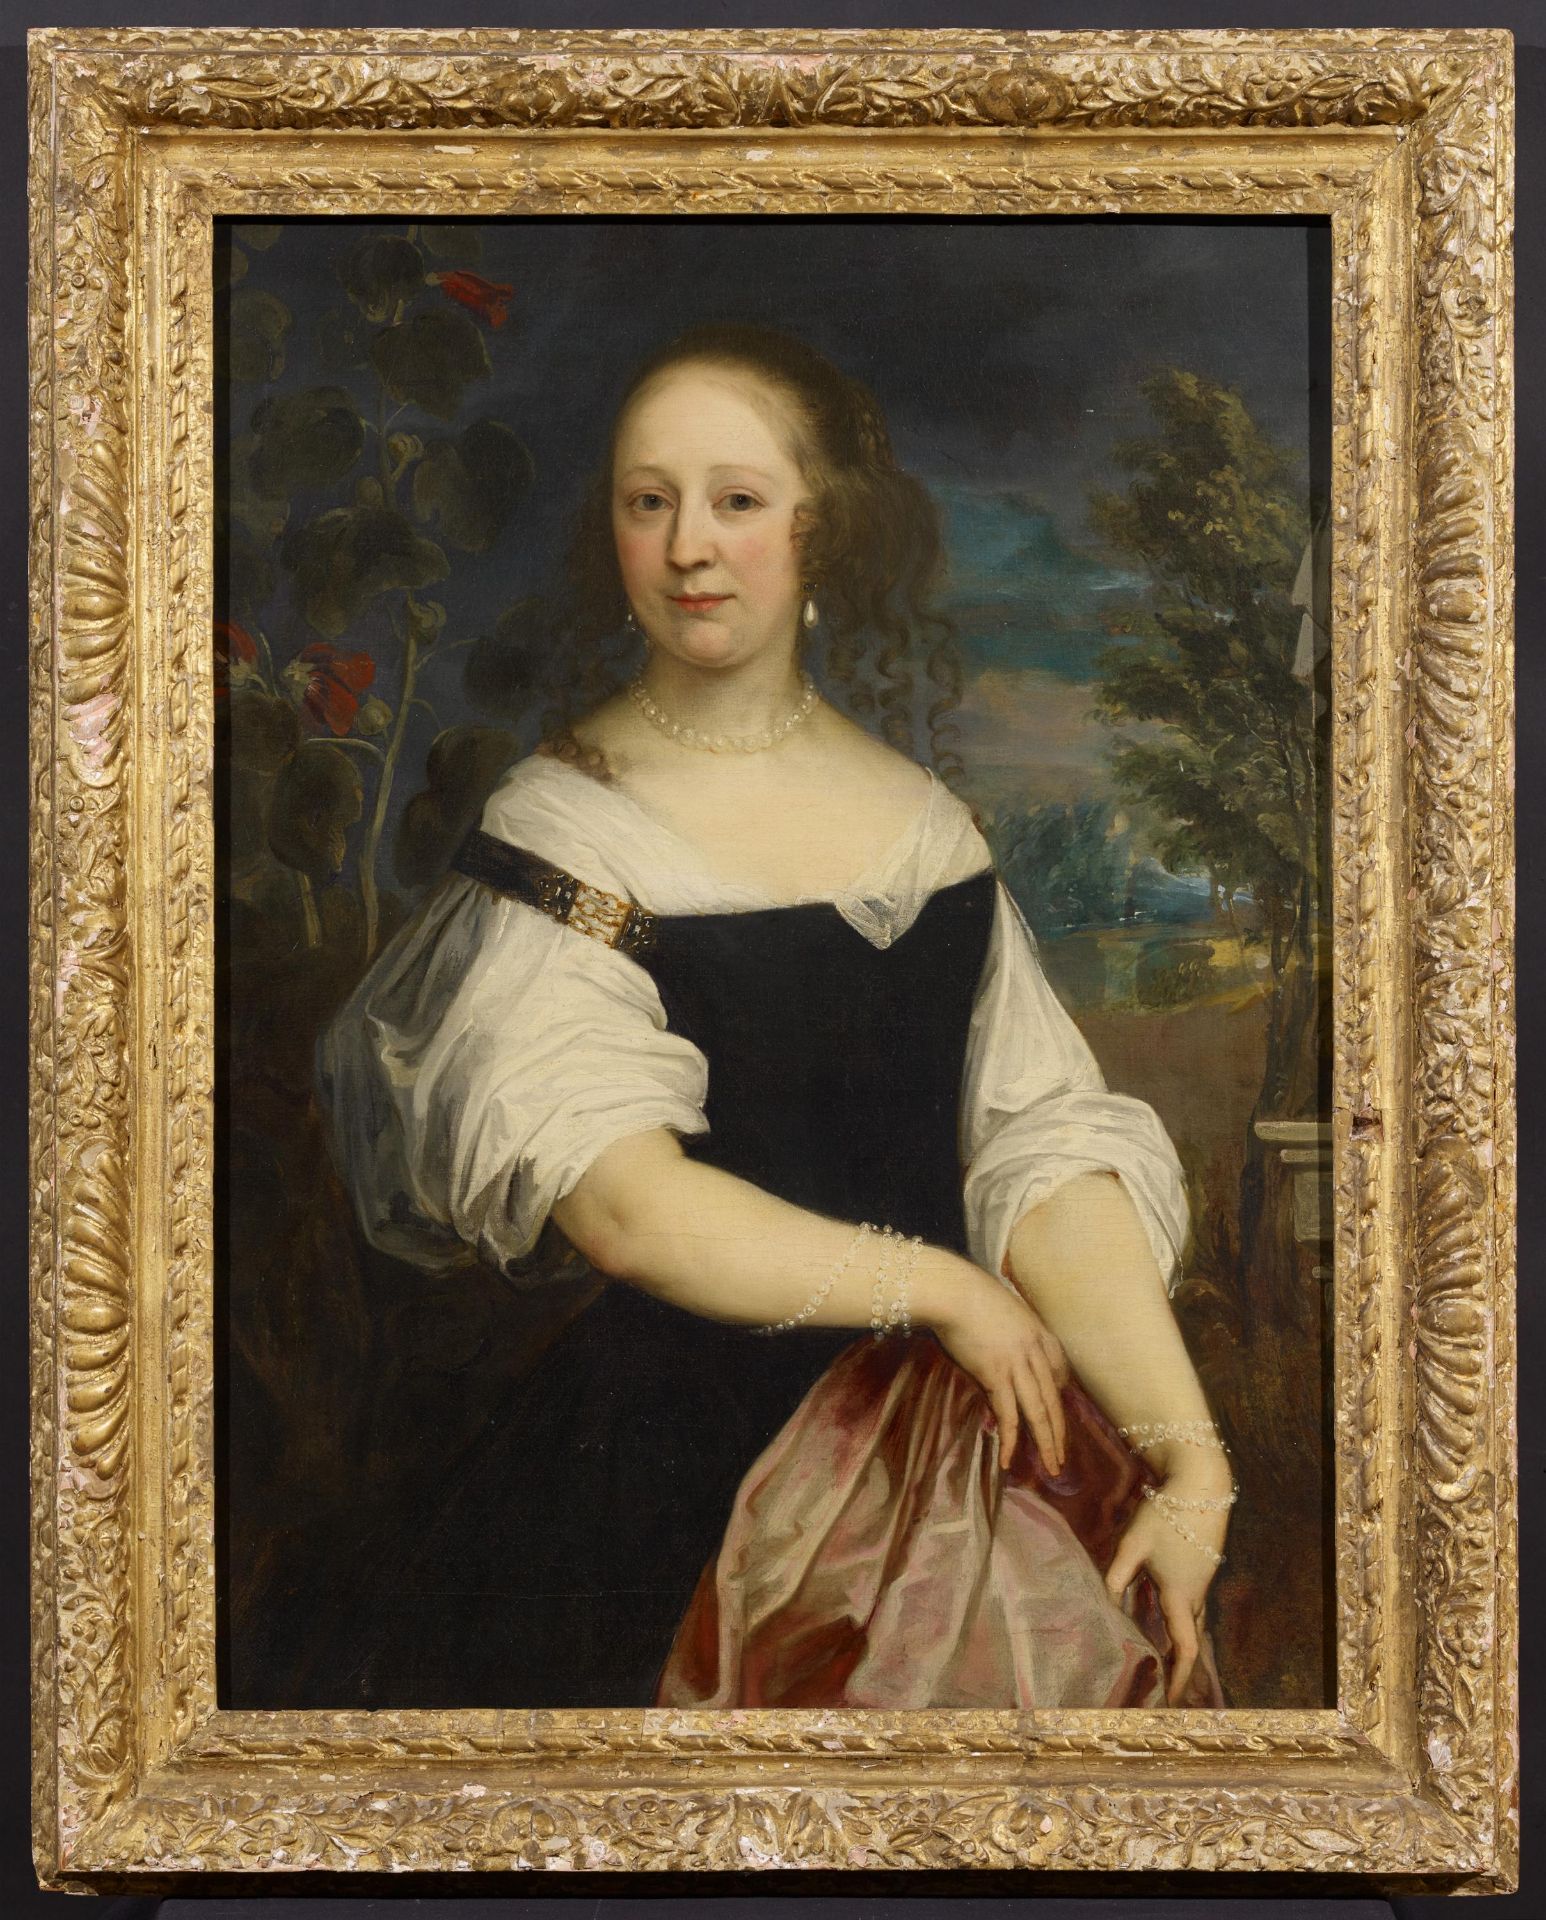 Dutch School: Portrait of a Lady with Pearl Jewellery in front of Landscape Background - Image 2 of 4